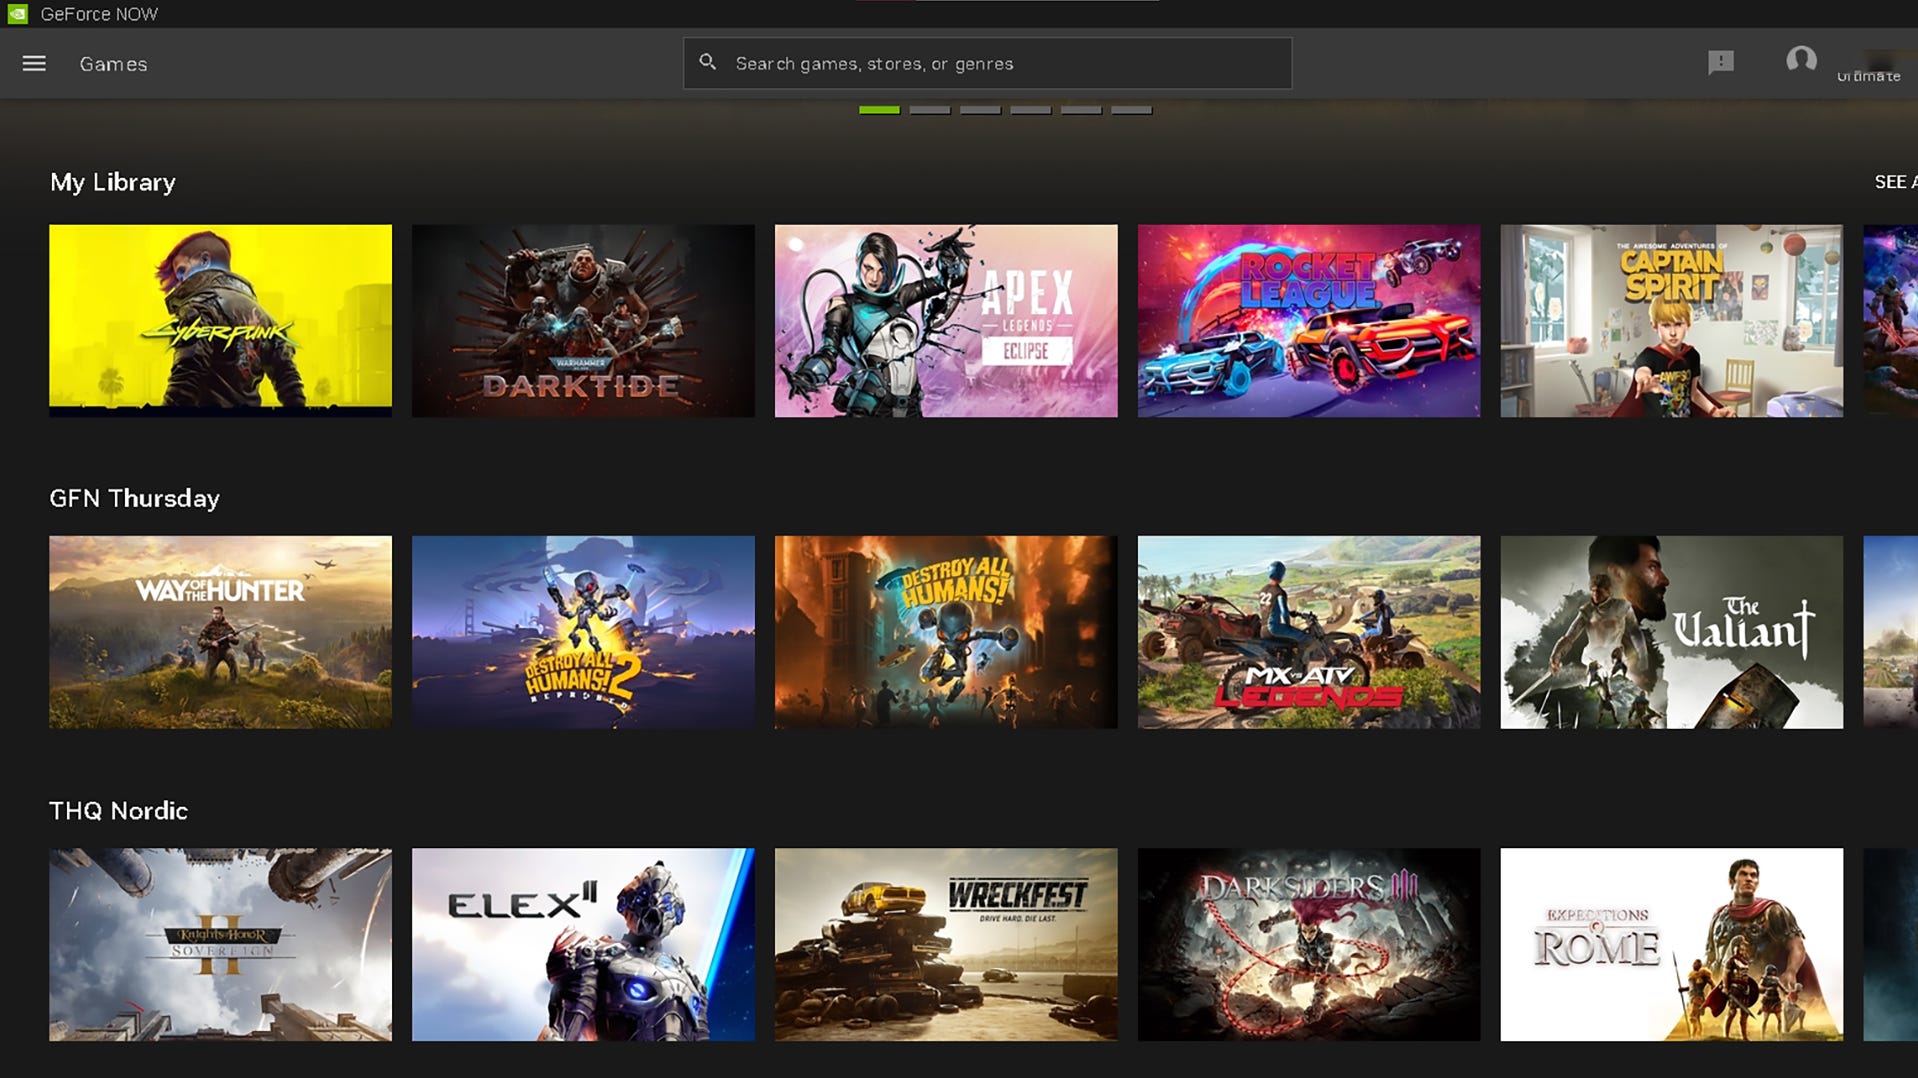 an image of the GFN Thursday category in the NVIDIA GeForce NOW Windows app.